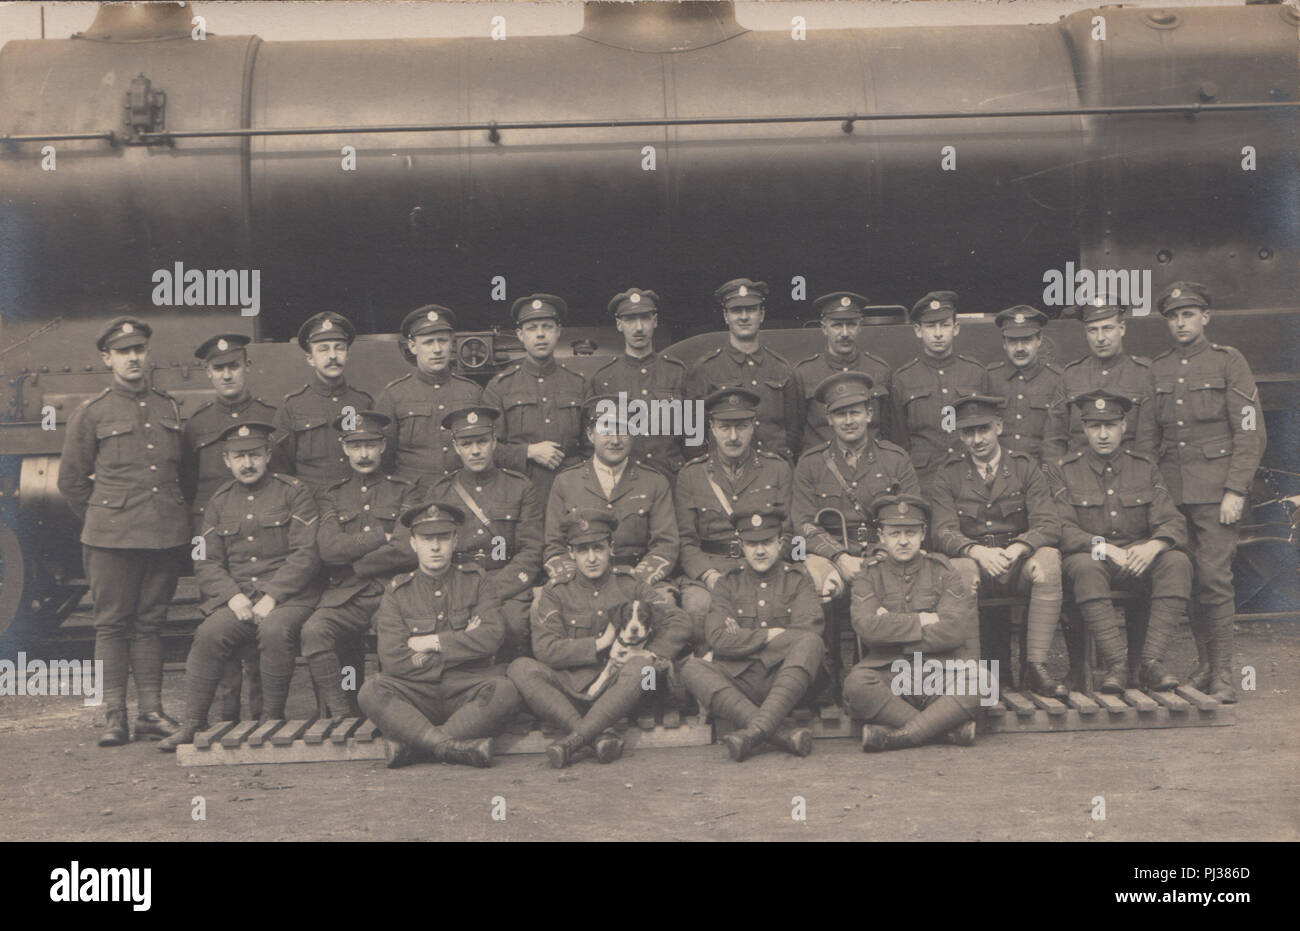 Vintage Photograph Showing a Group of British Army Soldiers With a Dog Posing in Front of a Train Stock Photo